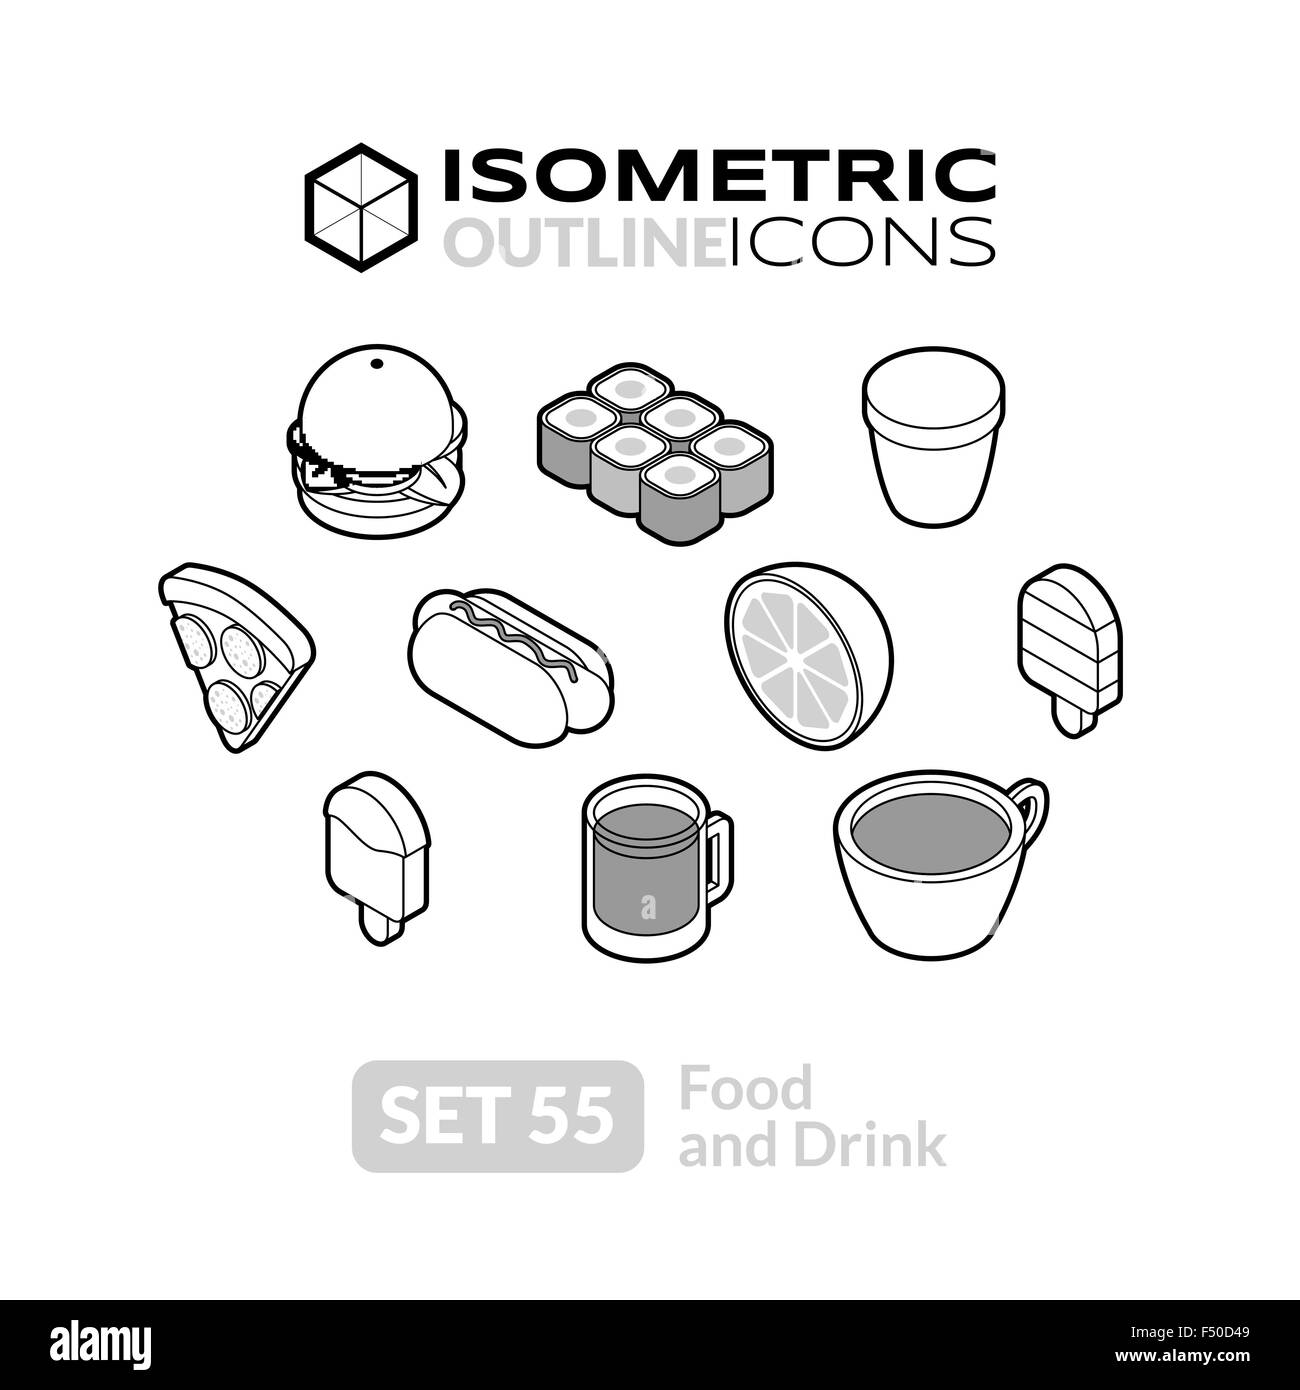 Isometric outline icons set 55 Stock Vector